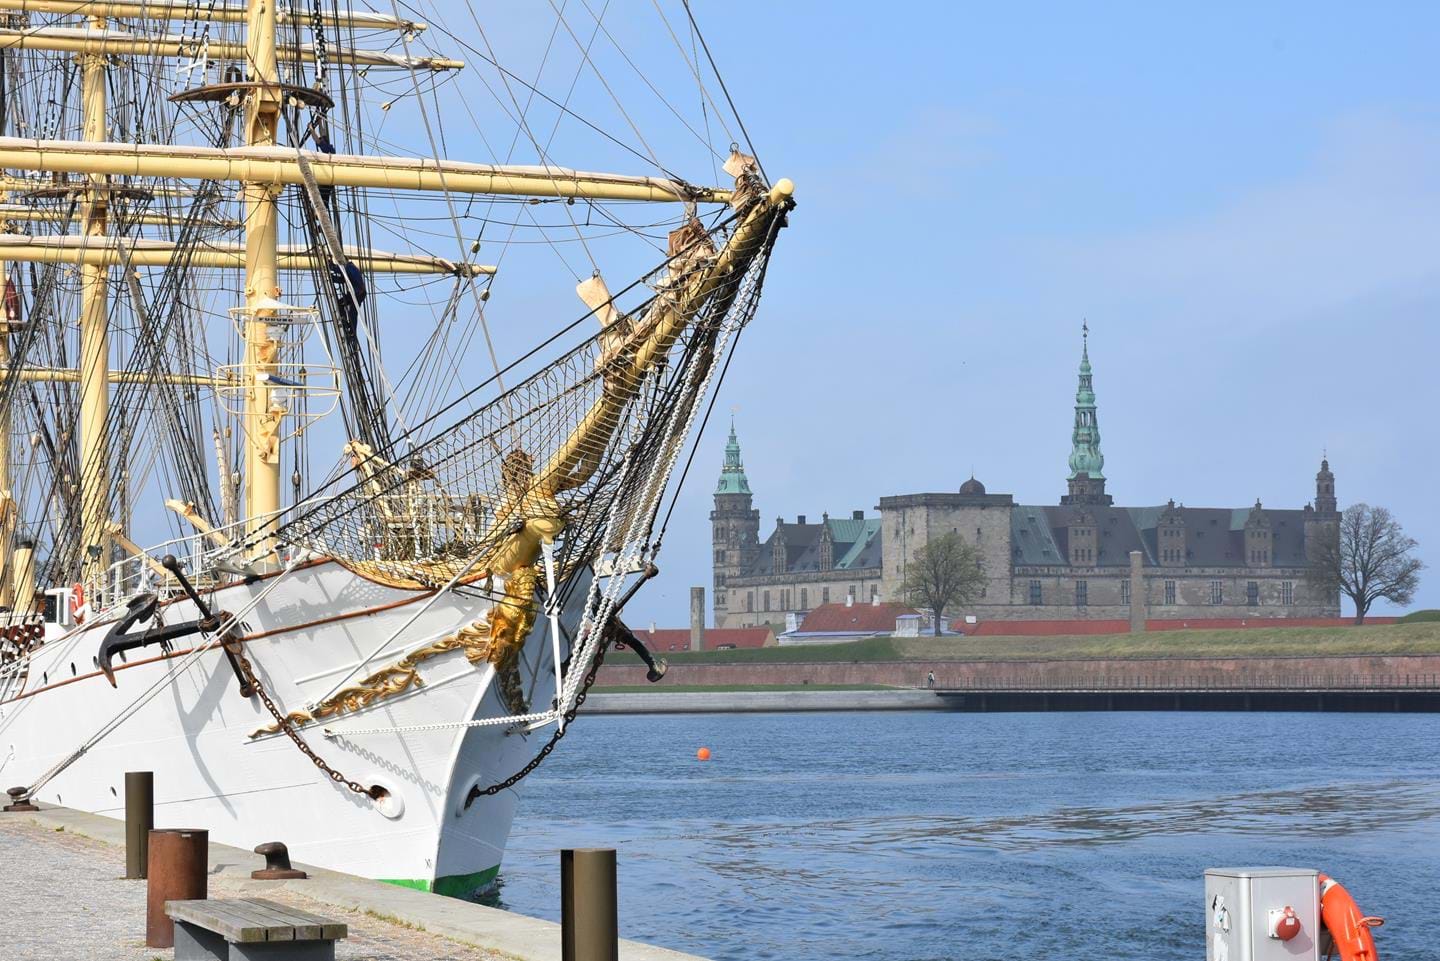 An old sailing ship with a castle in the background.